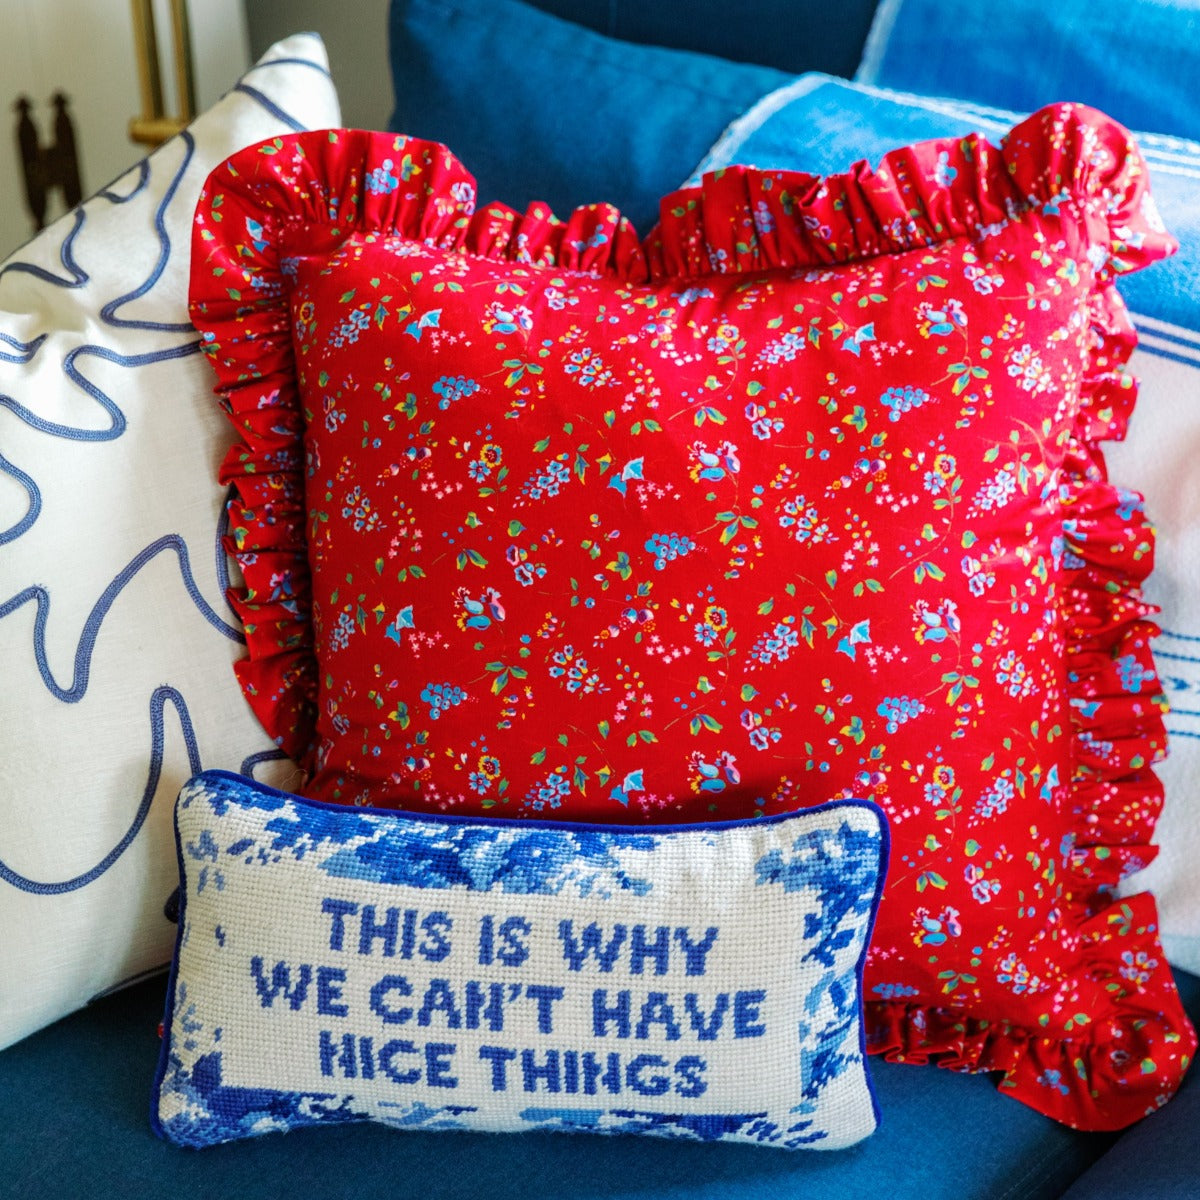 Nice Things Needlepoint Pillow